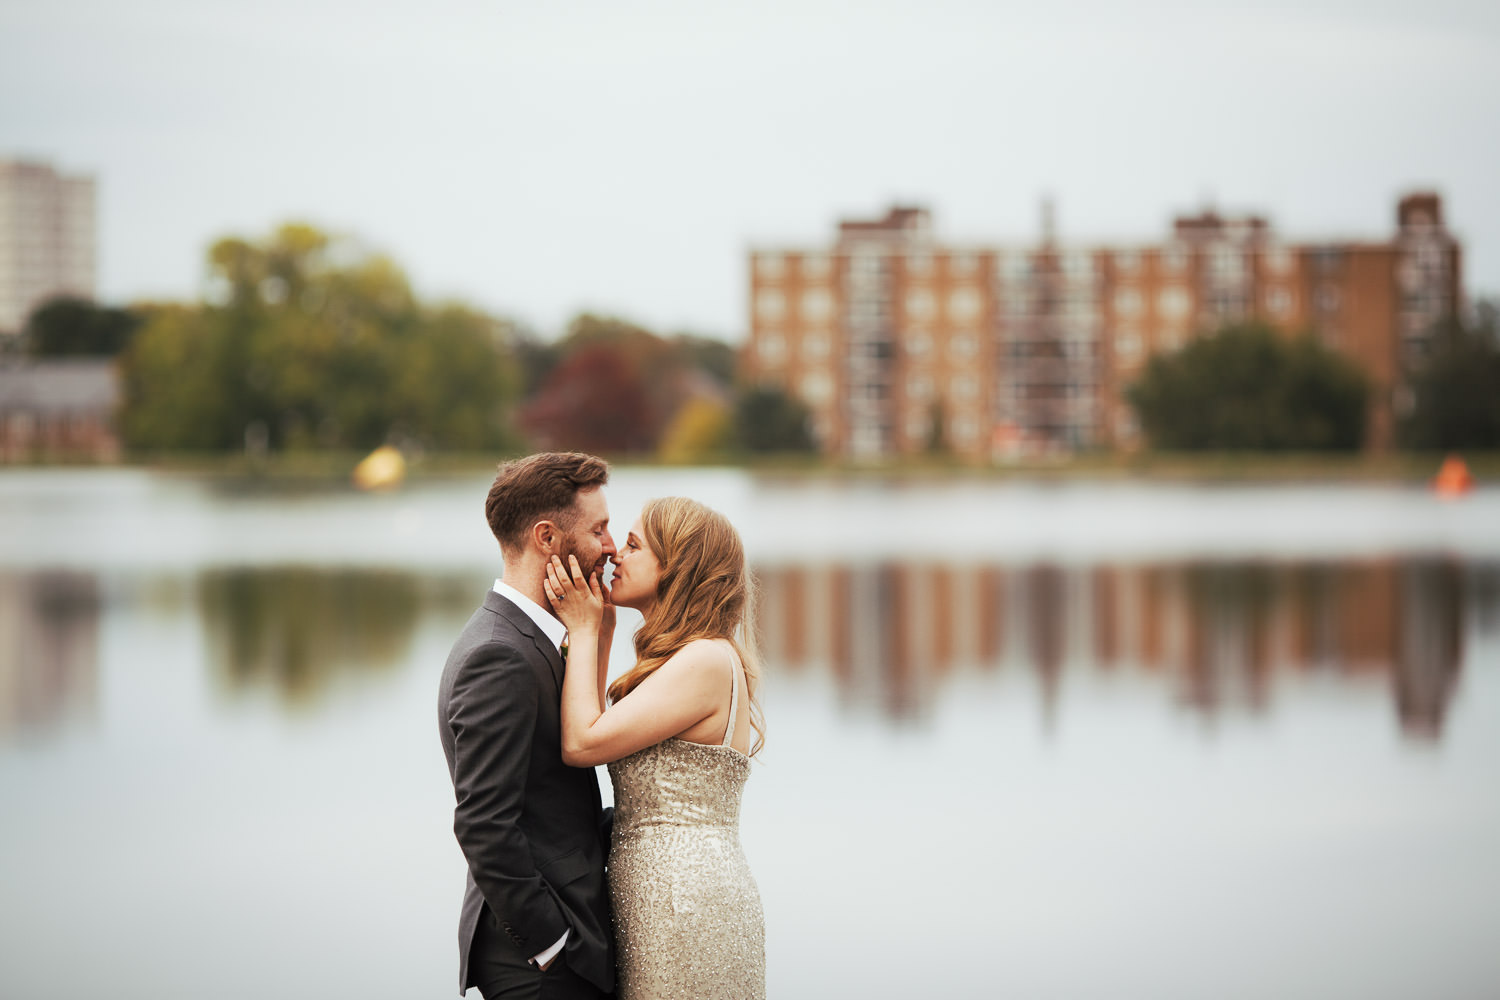 Newly married couple almost kissing by the lake at the West Reservoir Centre in Stoke Newington. the view of buildings in the Woodberry Down area. Bride has long hair and is wearing a sparkly dress. Man has hands in pockets of his suit.